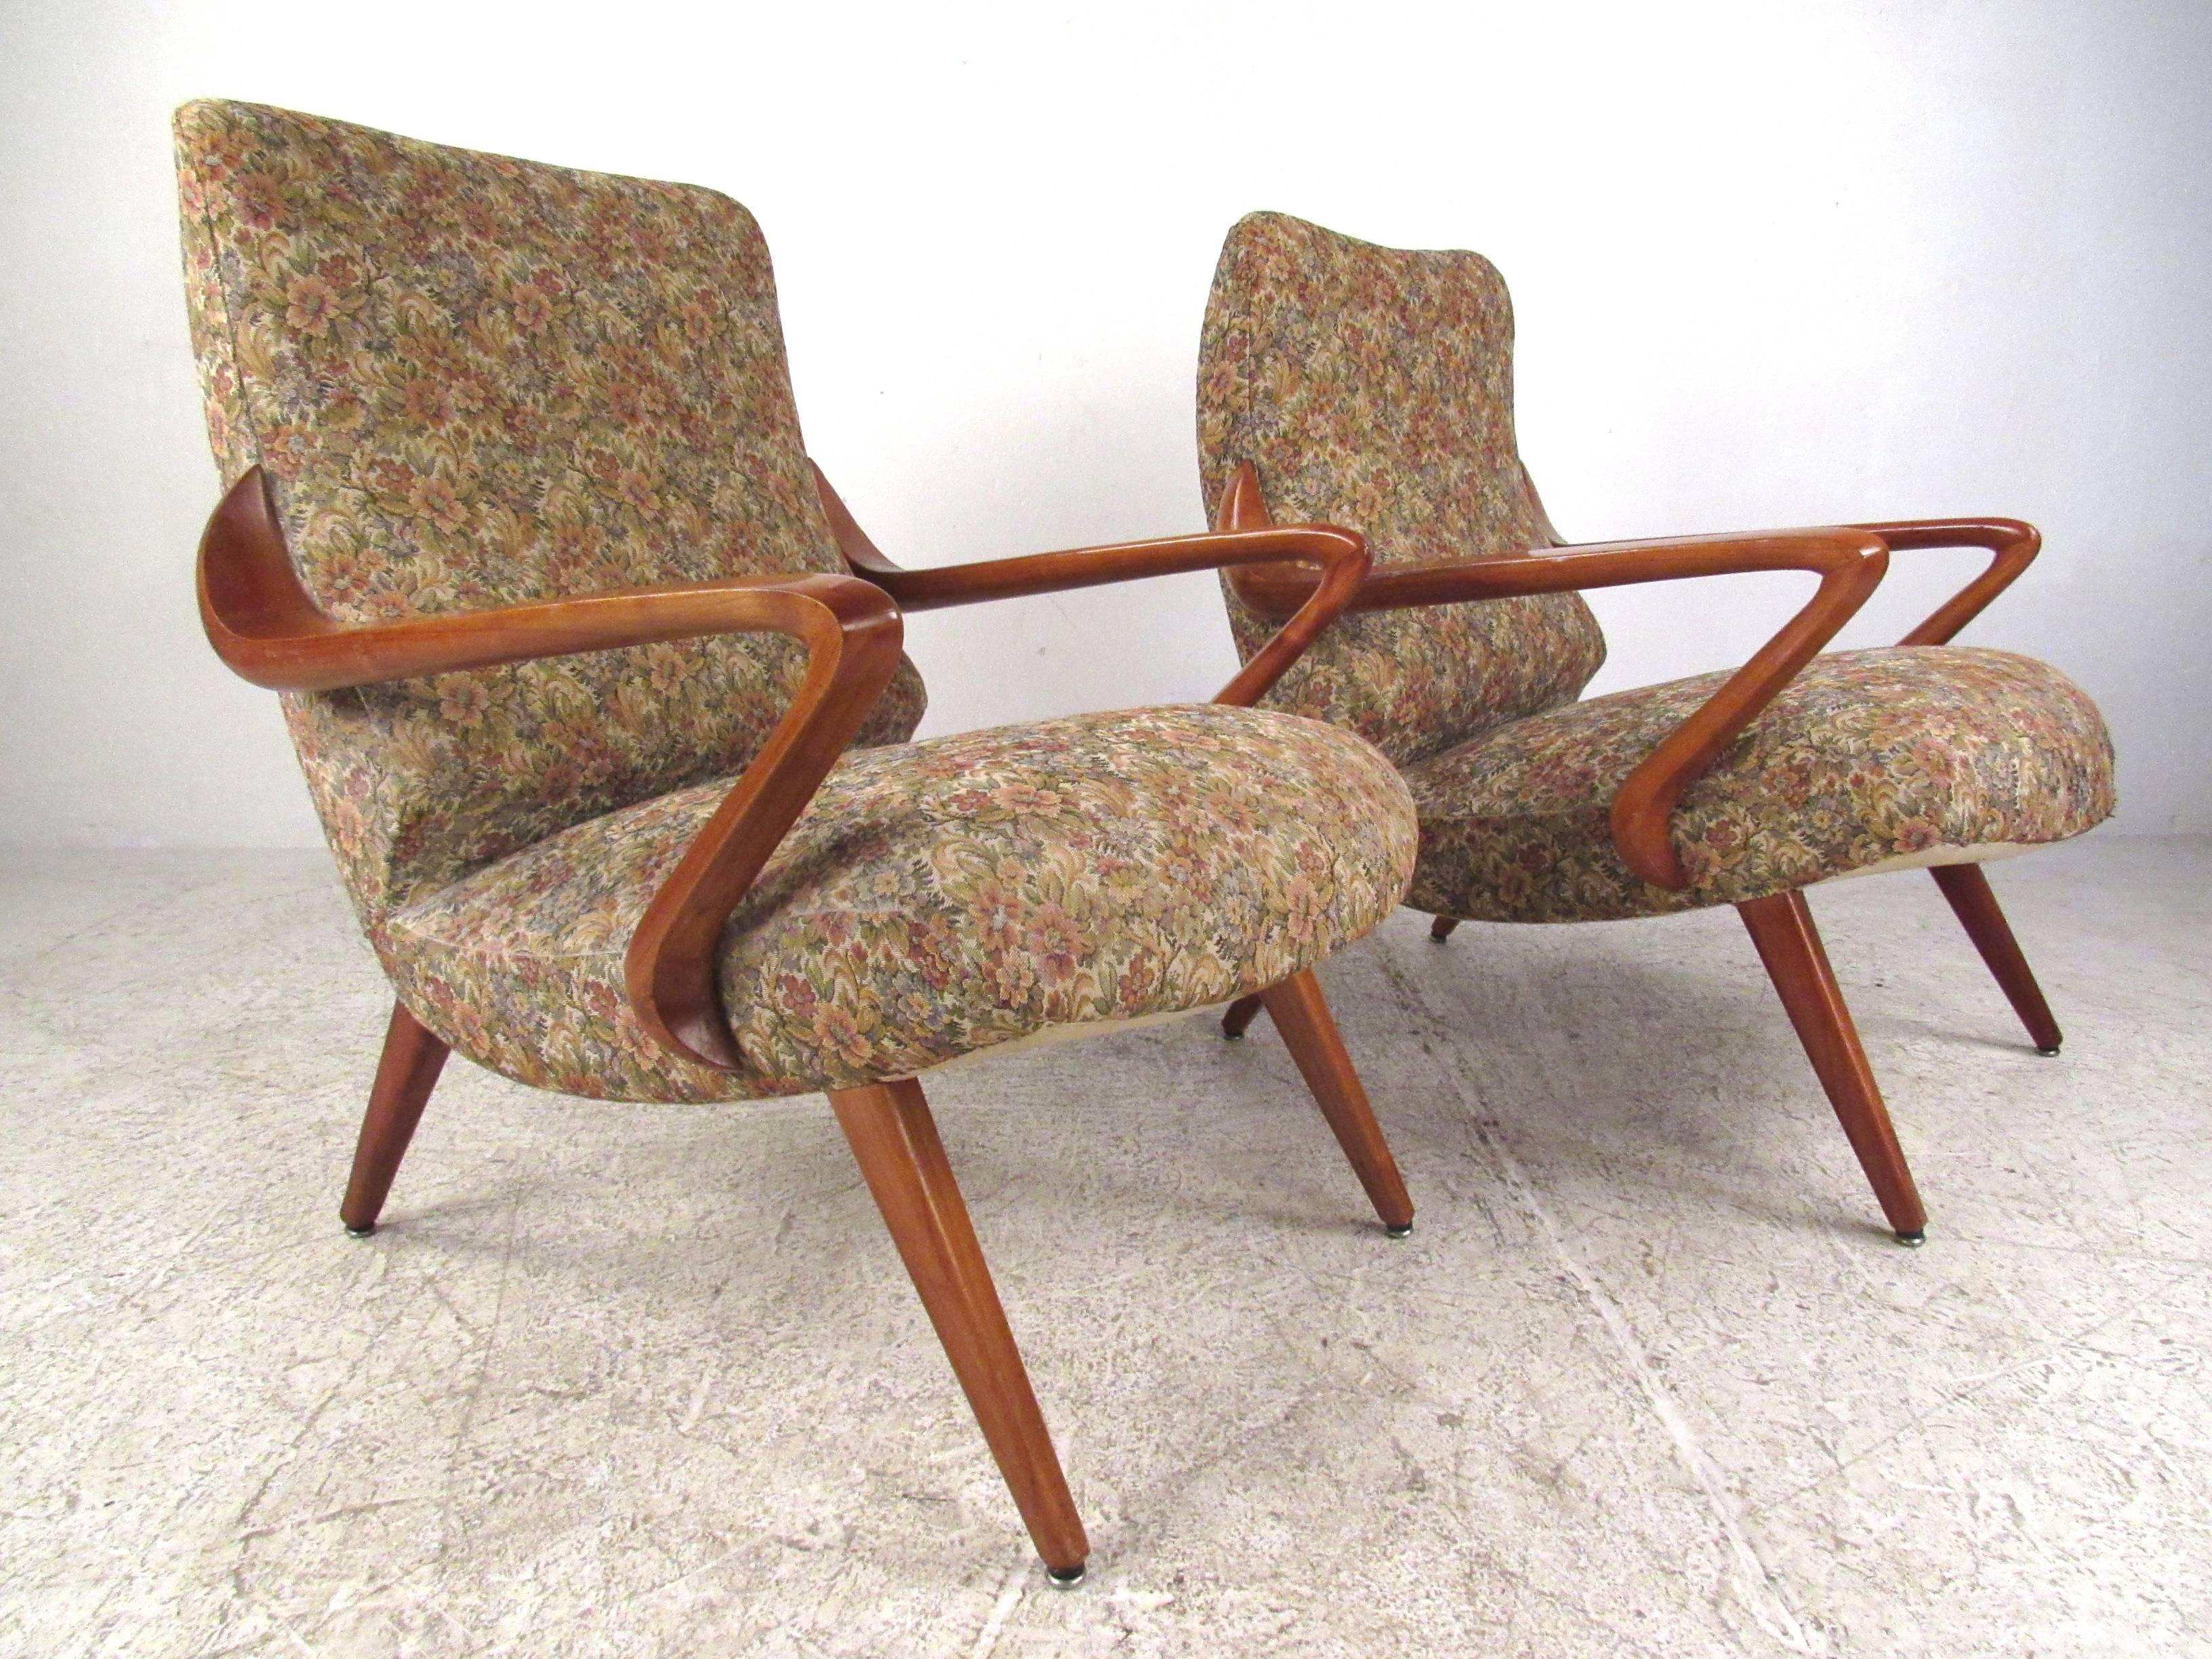 This incredible pair of sculptural lounge chairs features truly unique sculpted wood frames with sleek upholstered seats. Tapered legs and vintage floral fabric add to the Mid-Century Italian charm of the pair. Please confirm item location (NY or